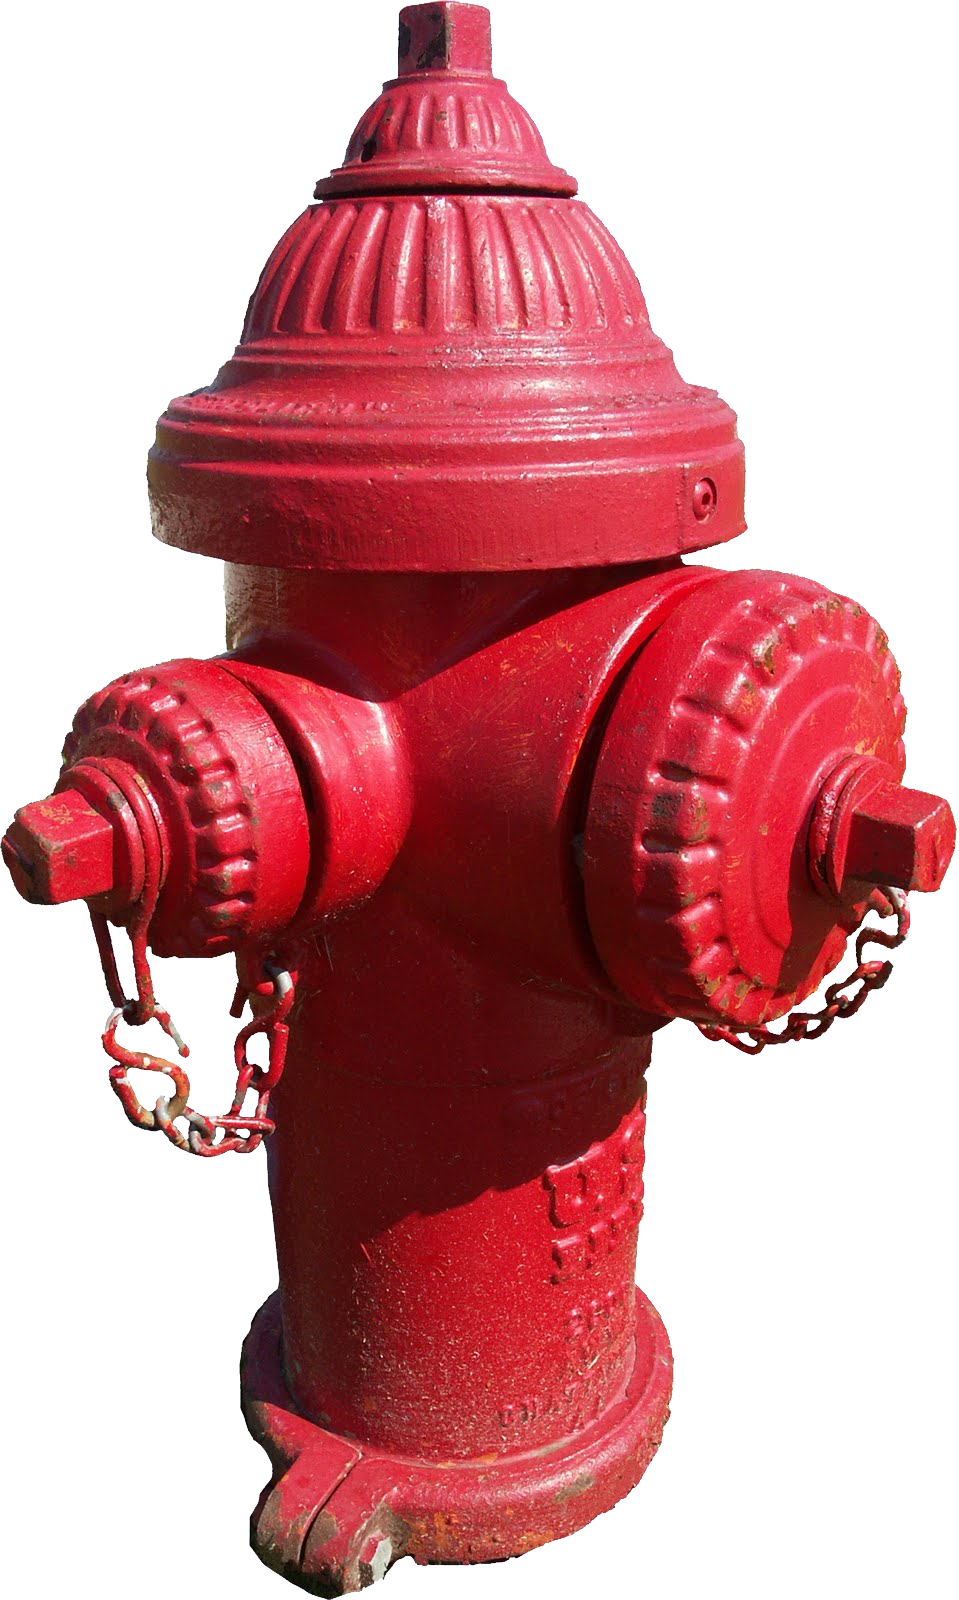 A Red Fire Hydrant With A Black Background